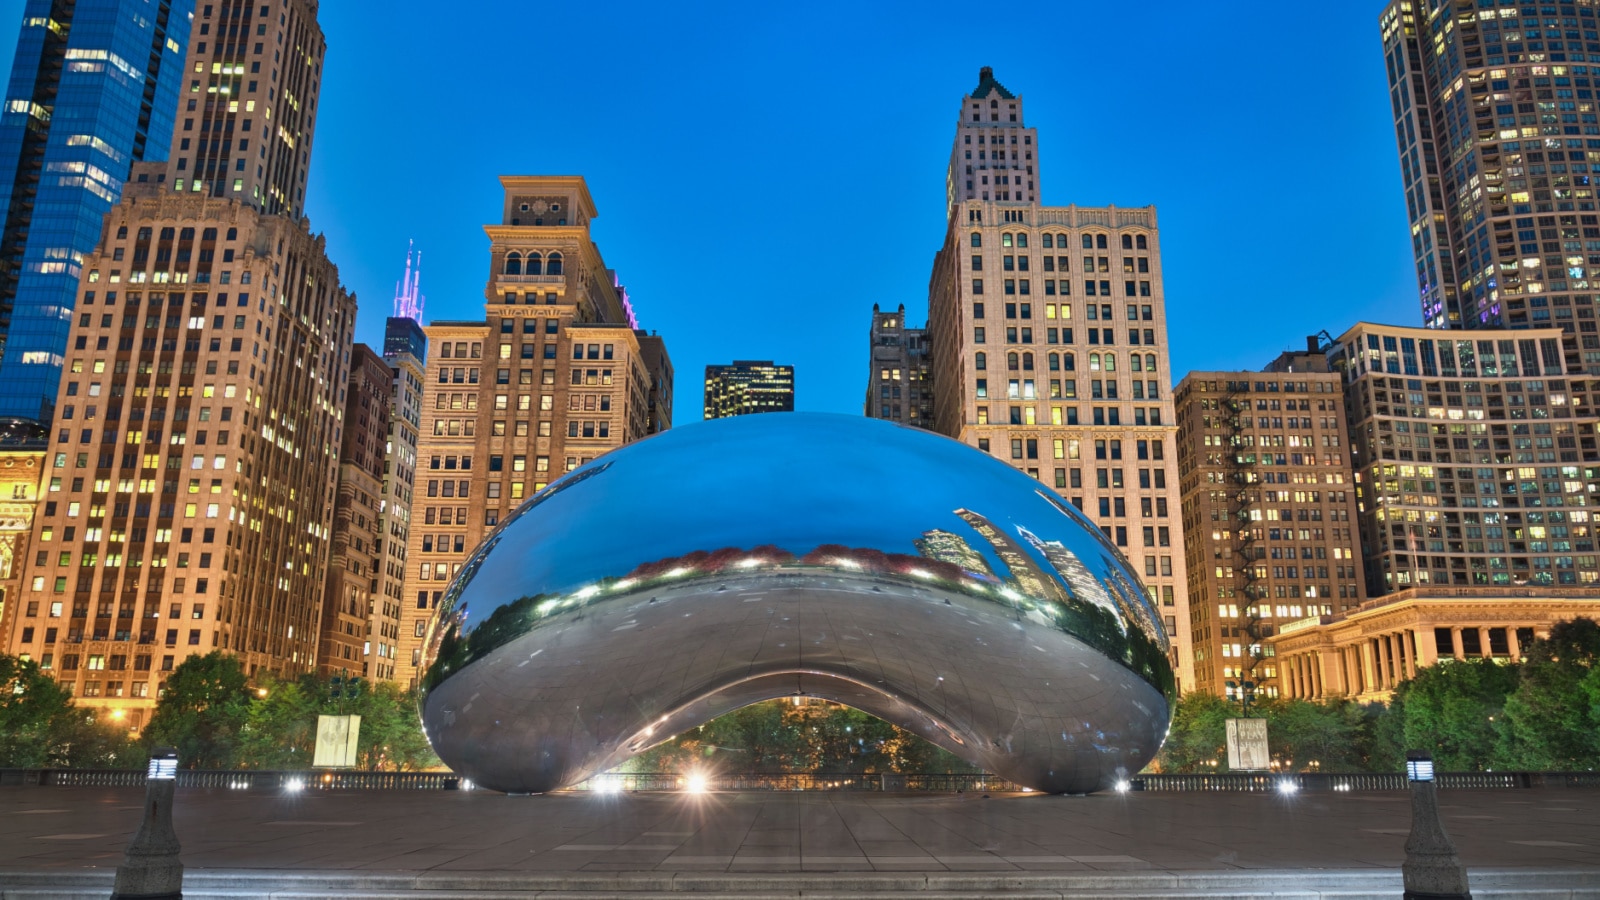 <p>In downtown Chicago, Millennium Park is a must-visit for its iconic “Bean” sculpture, beautiful gardens, and free concerts. It’s a cultural hub in the heart of the city.</p>